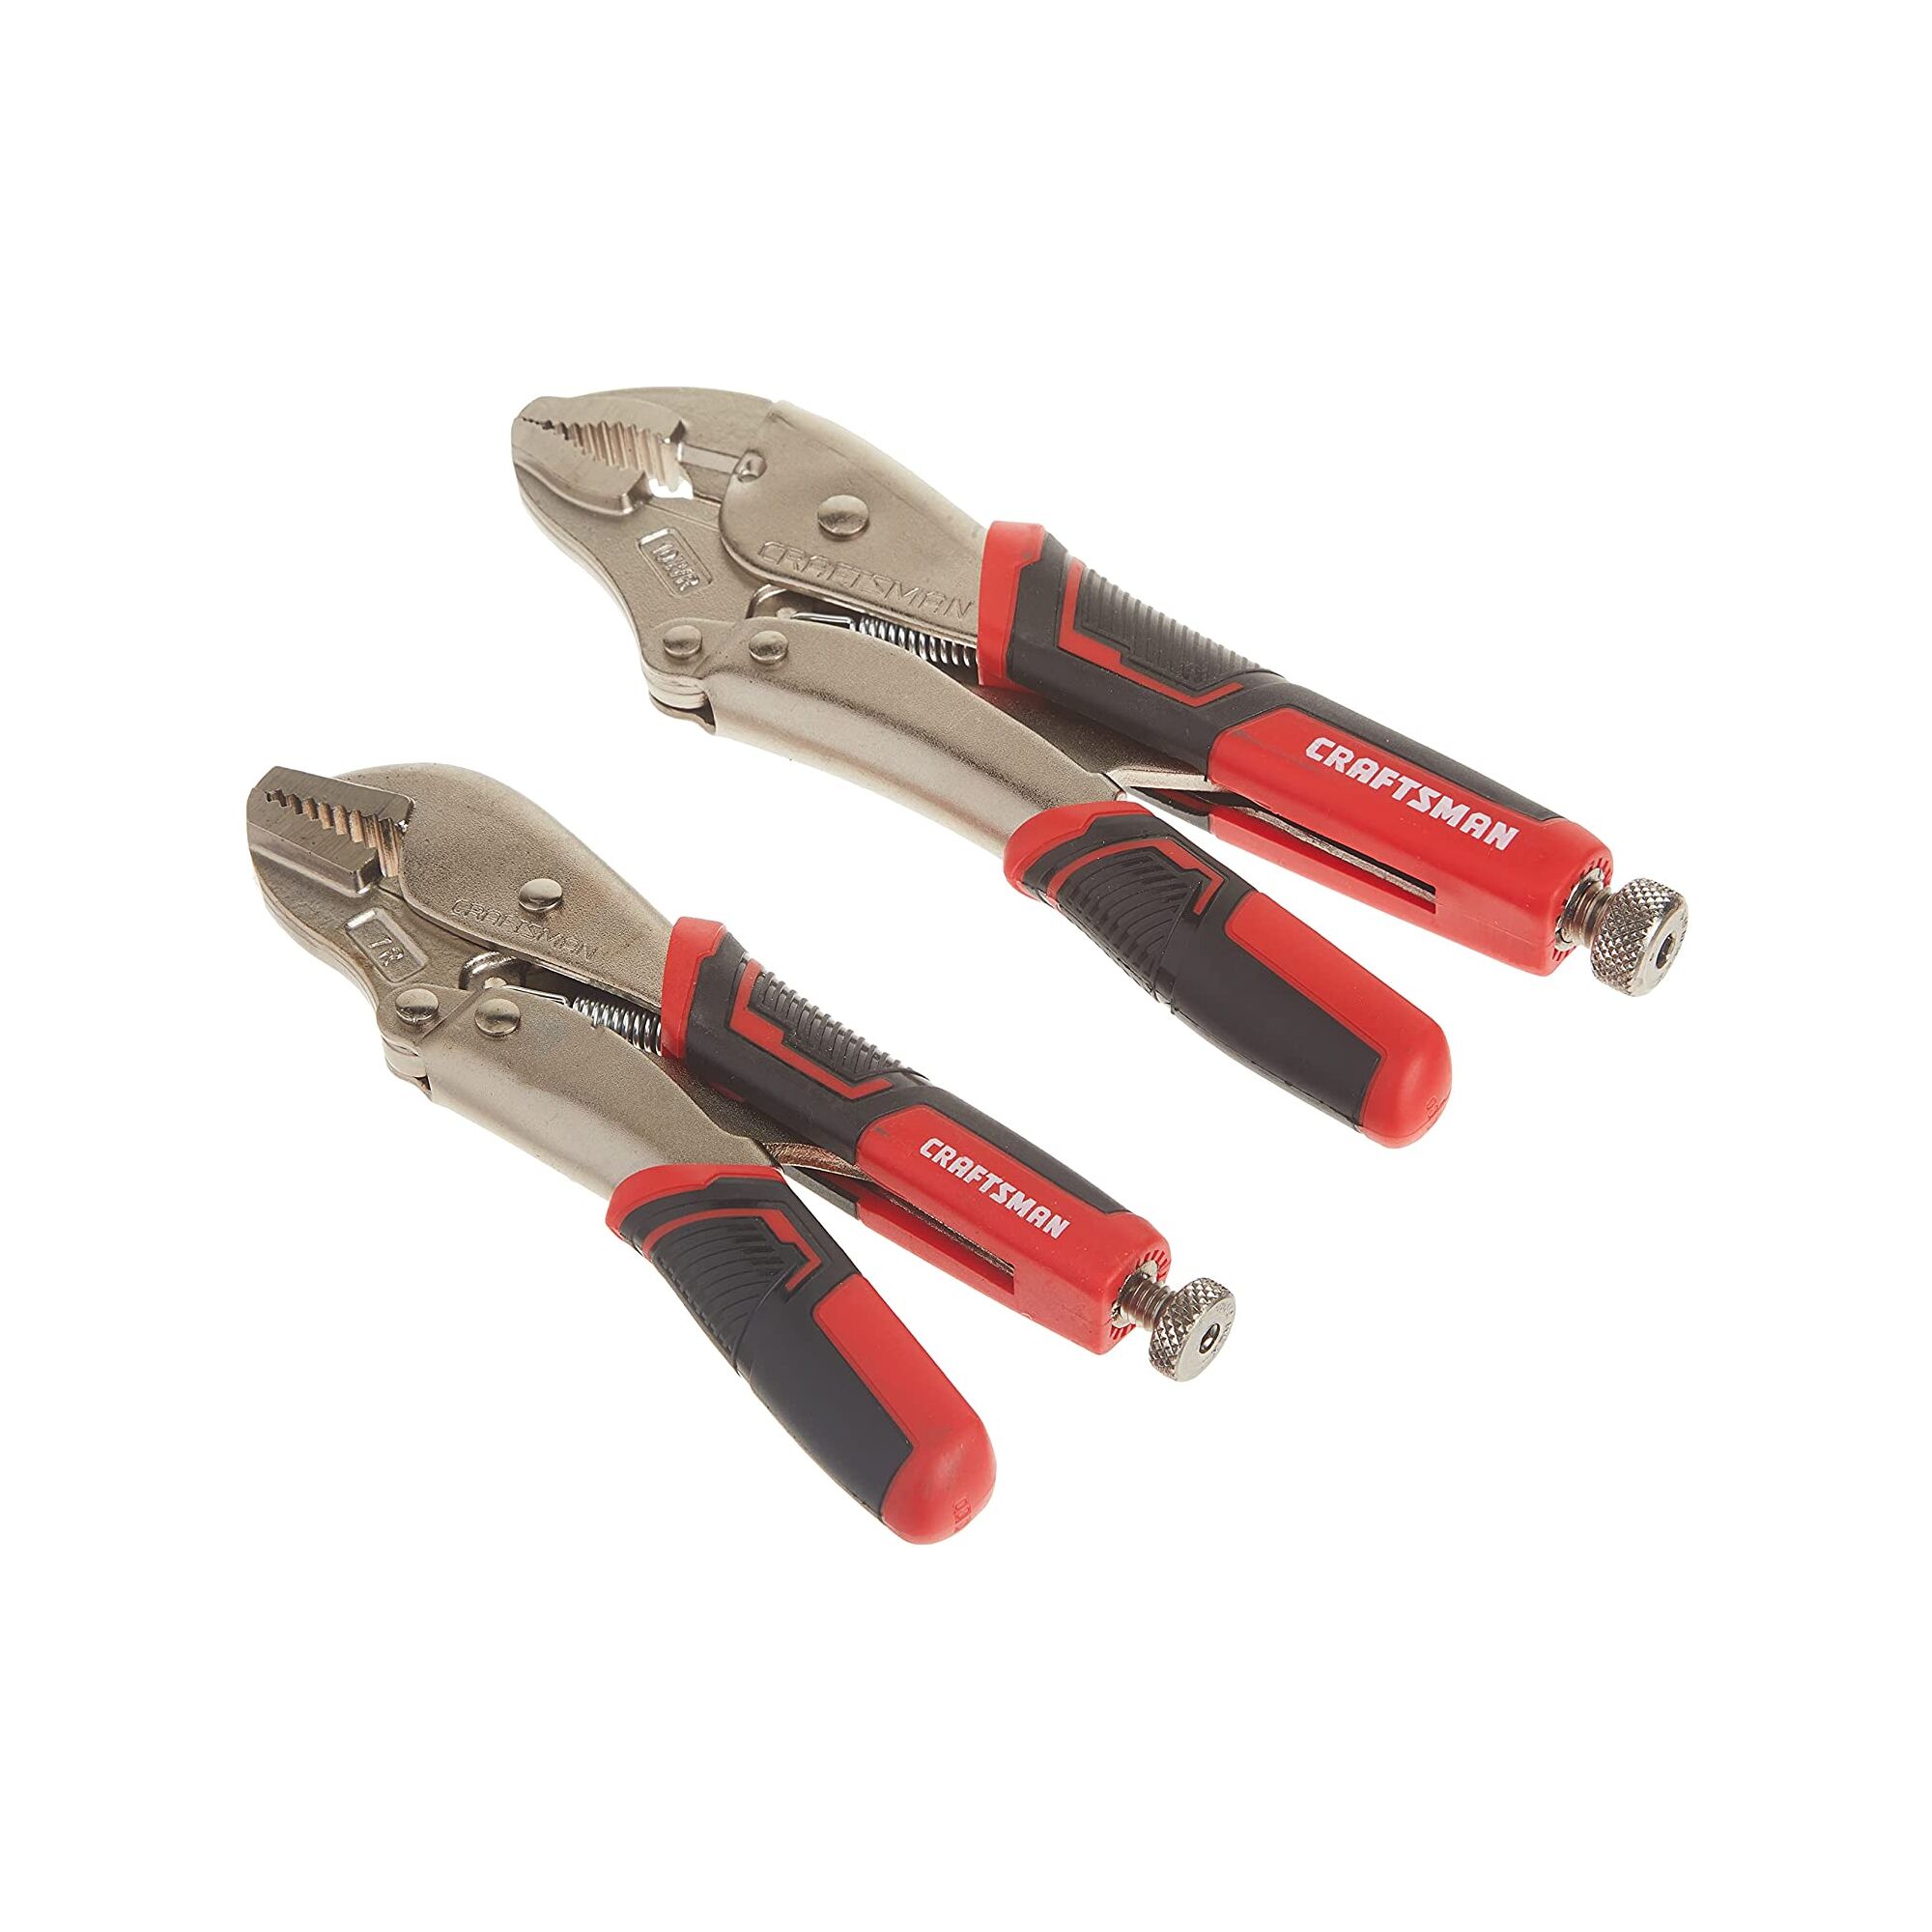 View of CRAFTSMAN Pliers: Locking Set and additional tools in the kit